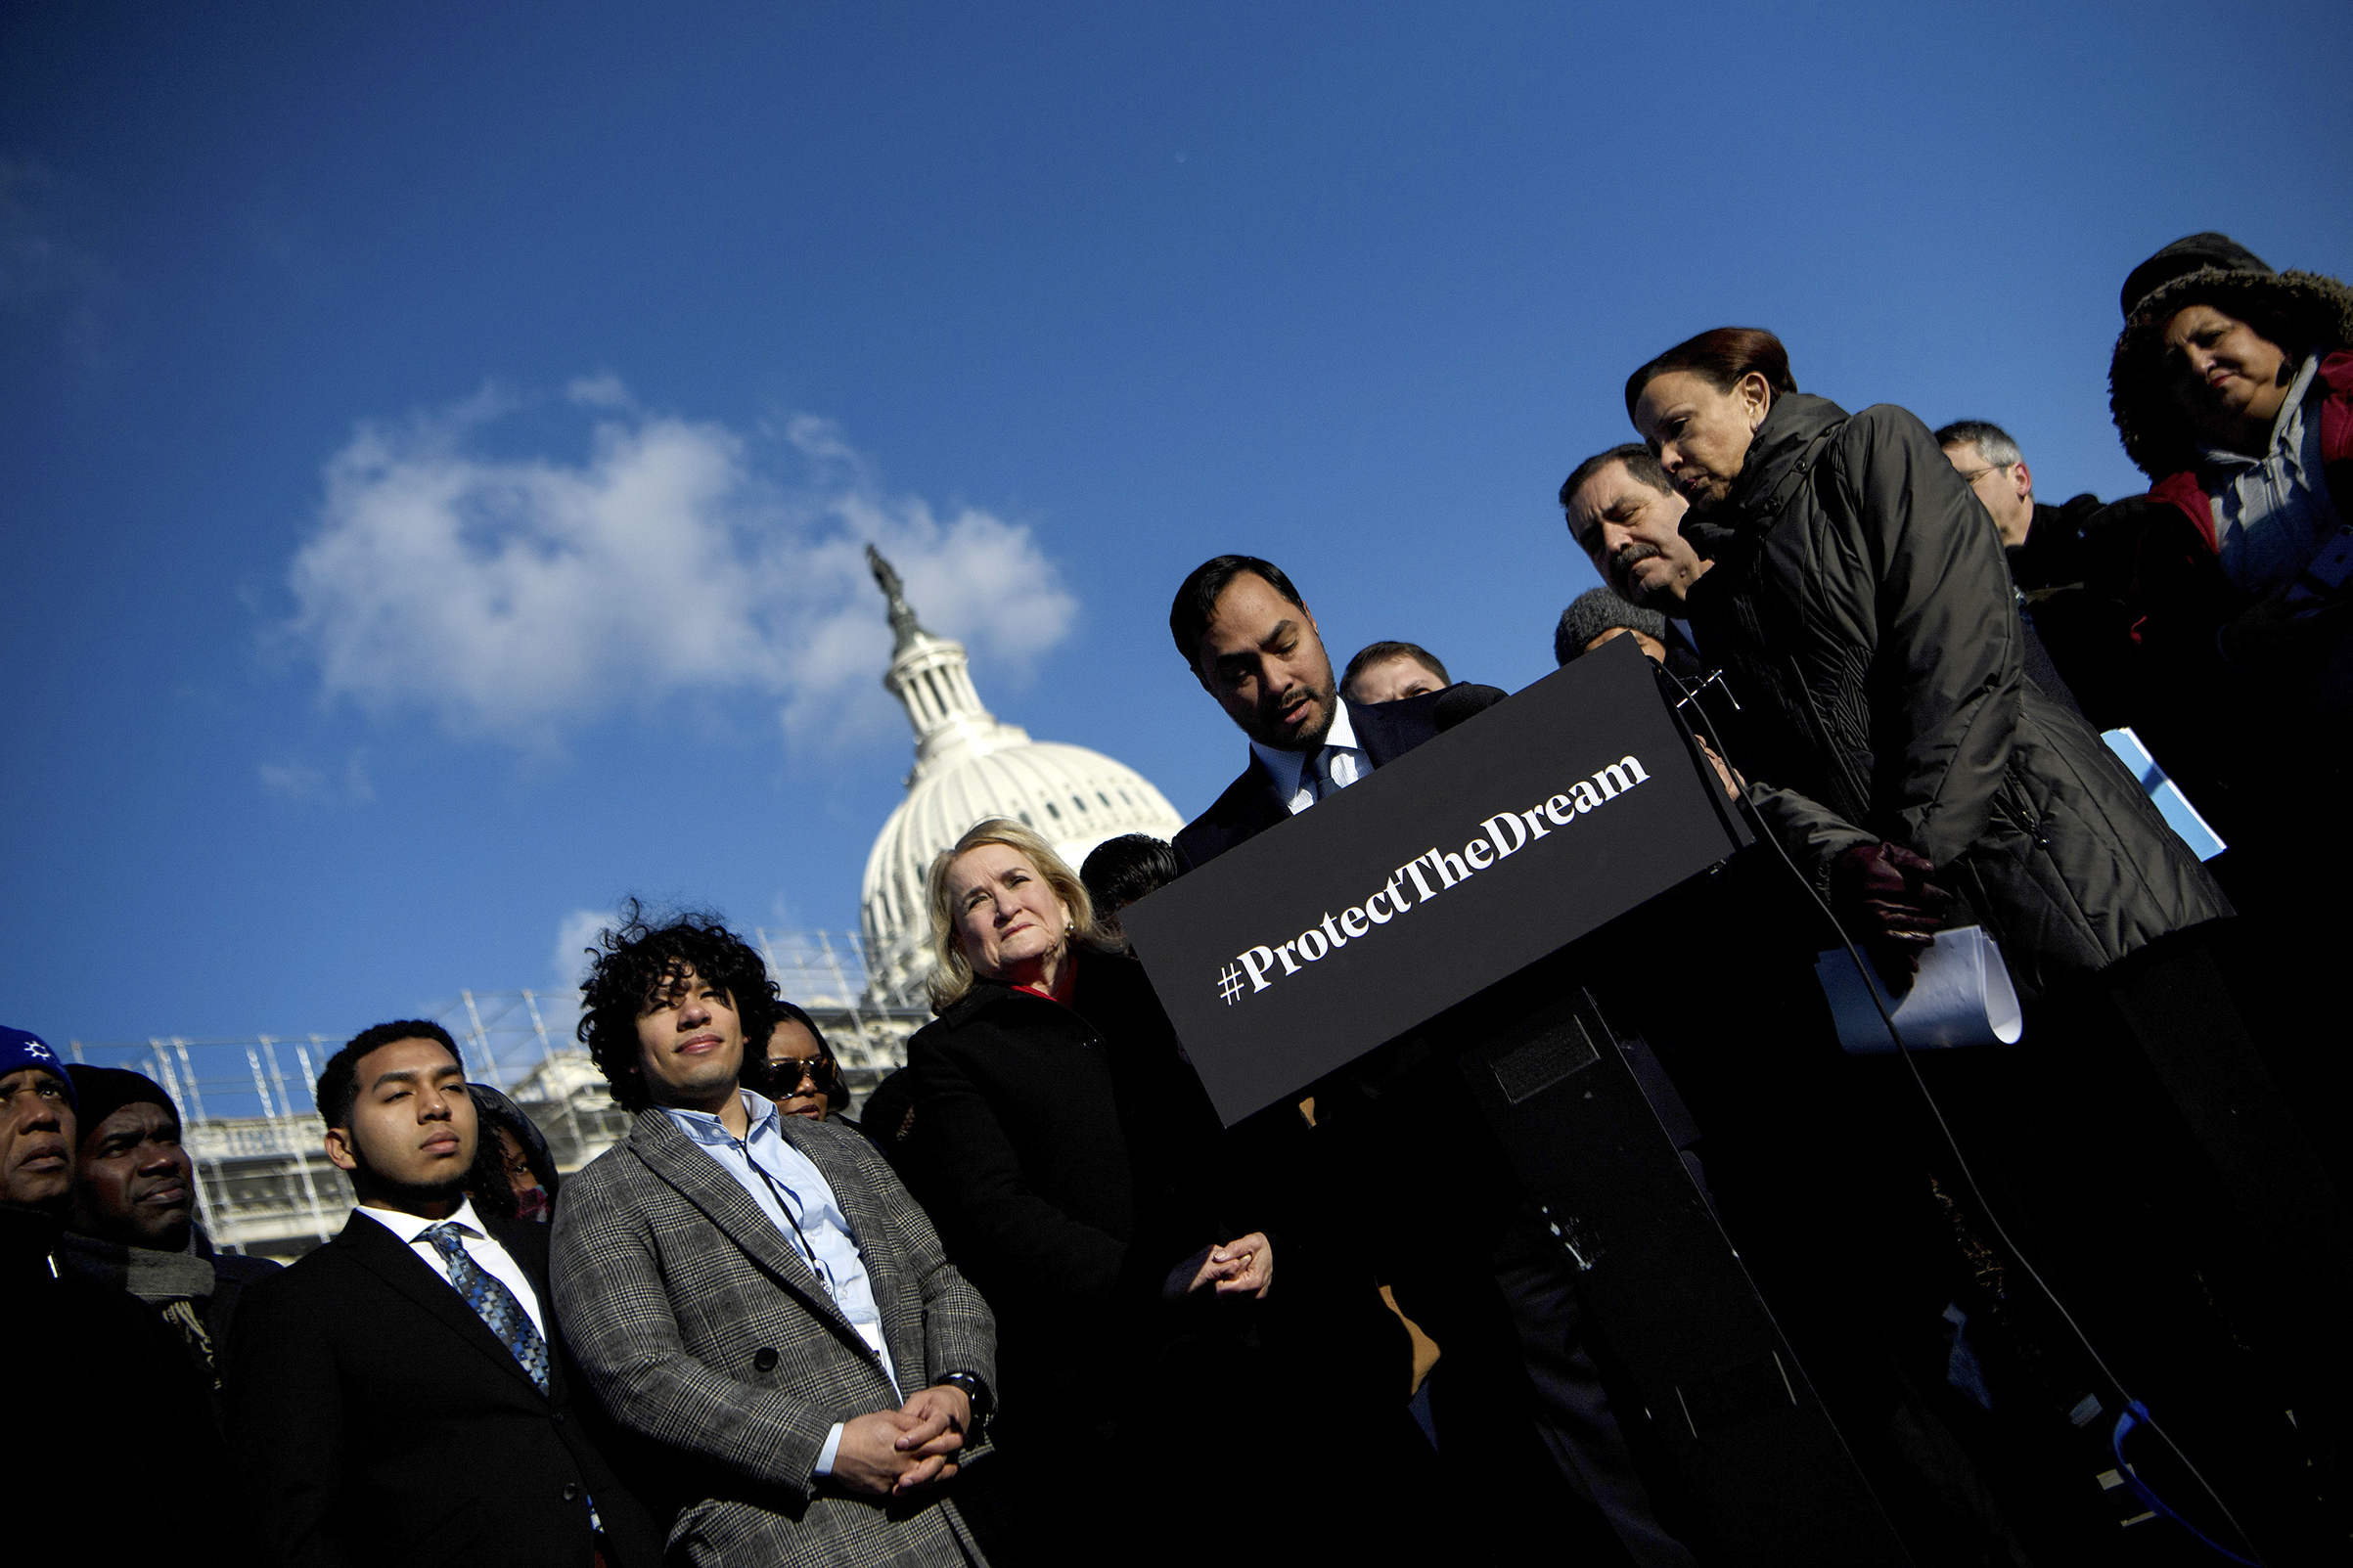 Texas Representative Joaquin Castro and others participate in an event with DACA (Deferred Action for Childhood Arrivals), TPS (Temporary Protected Status), and DED (Deferred Enforced Departure) recipients on March 6 in Washington, DC. (Brendan Smialowski—AFP/Getty Images)